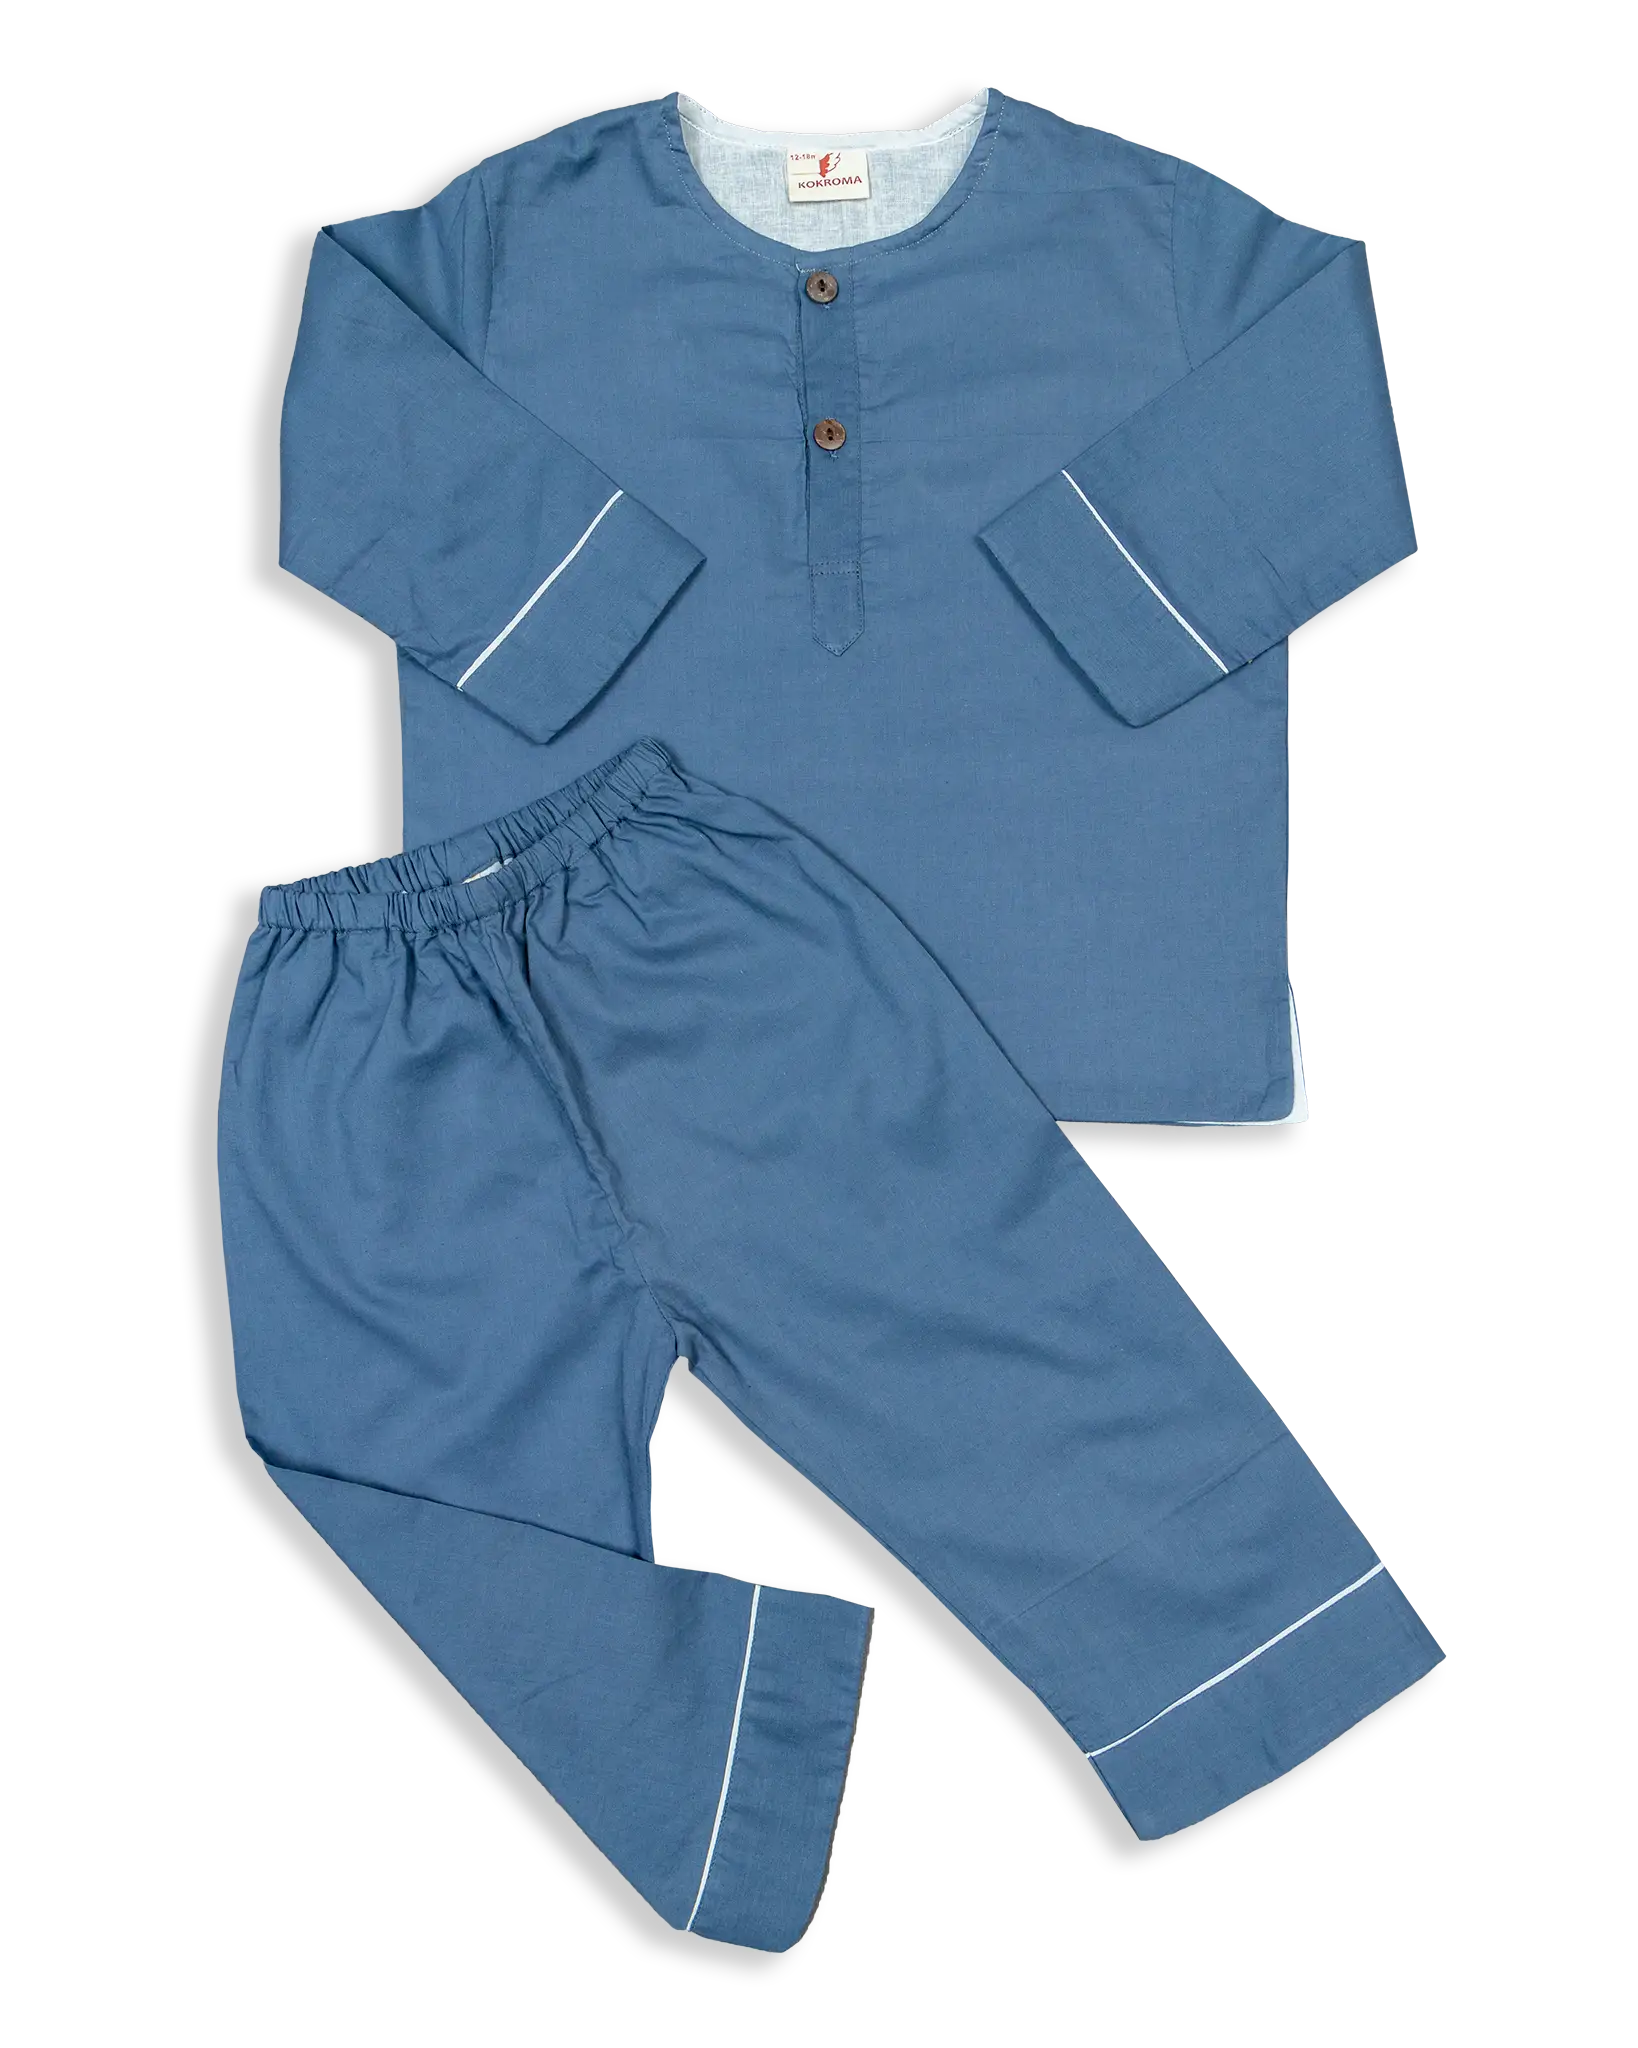 Make your little one feel comfortable, look great, and sleep soundly with Plain Pyjamas. Made with 100% cotton, beautiful colour option and super soft pyjama. Get ready for a luxurious night's sleep in our range of fashionable and cozy pyjama's that are made to last. With our broad spectrum of colours, you'll be sure to find the perfect fit for your baby. Upgrade your baby night-time routine with Plain Panamas' superior quality!